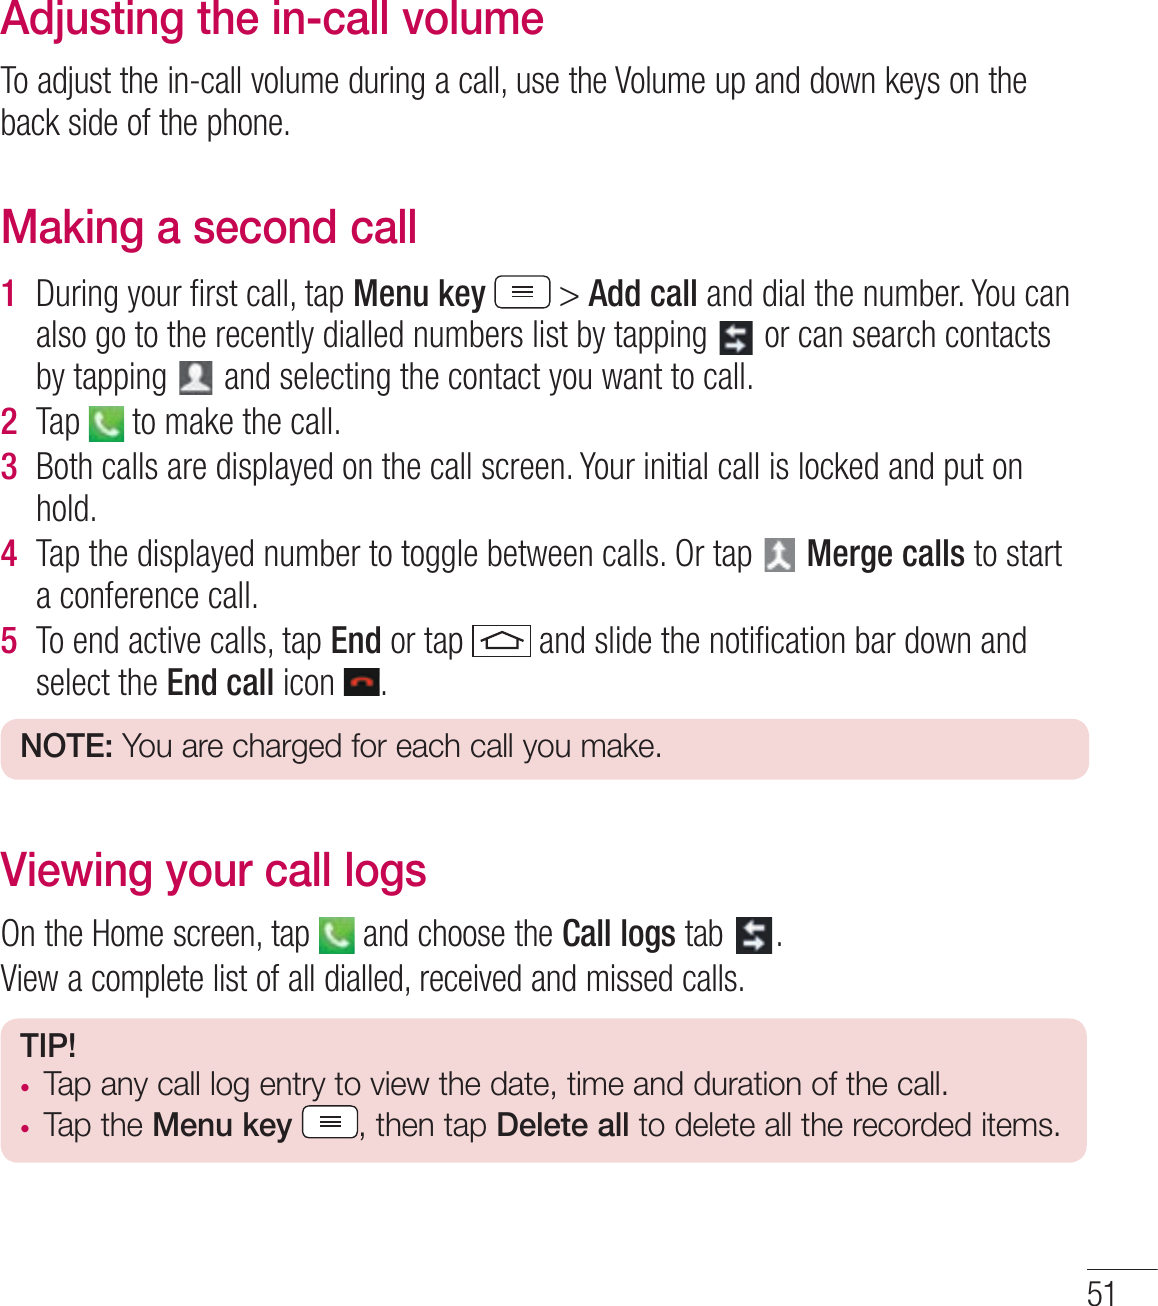 51Adjusting the in-call volumeTo adjust the in-call volume during a call, use the Volume up and down keys on the back side of the phone.Making a second call1  During your ﬁrst call, tap Menu key  &gt; Add call and dial the number. You can also go to the recently dialled numbers list by tapping   or can search contacts by tapping   and selecting the contact you want to call.2  Tap   to make the call.3  Both calls are displayed on the call screen. Your initial call is locked and put on hold.4  Tap the displayed number to toggle between calls. Or tap   Merge calls to start a conference call.5  To end active calls, tap End or tap   and slide the notiﬁcation bar down and select the End call icon  .NOTE: You are charged for each call you make.Viewing your call logsOn the Home screen, tap   and choose the Call logs tab  .View a complete list of all dialled, received and missed calls.TIP! tTap any call log entry to view the date, time and duration of the call.tTap the Menu key , then tap Delete all to delete all the recorded items.